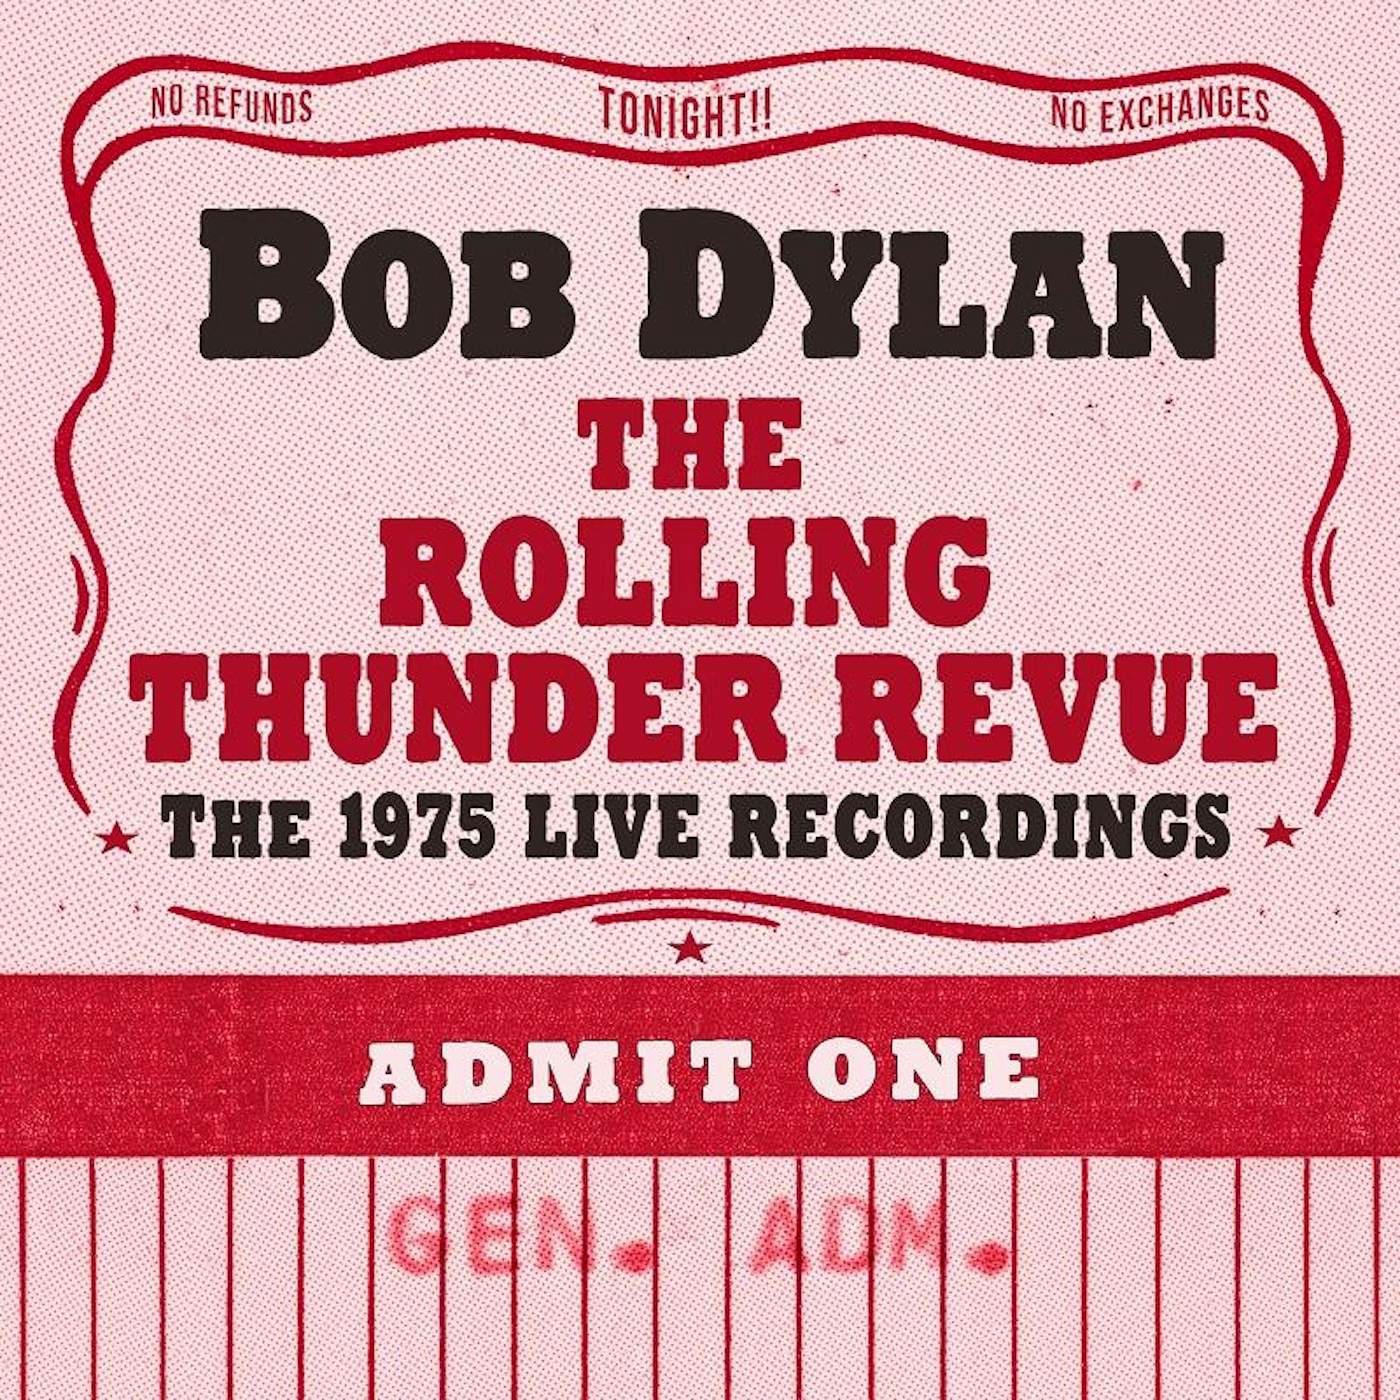 Bob Dylan The Rolling Thunder Revue: The 1975 Live Recordings - Deluxe 14CD Box Set